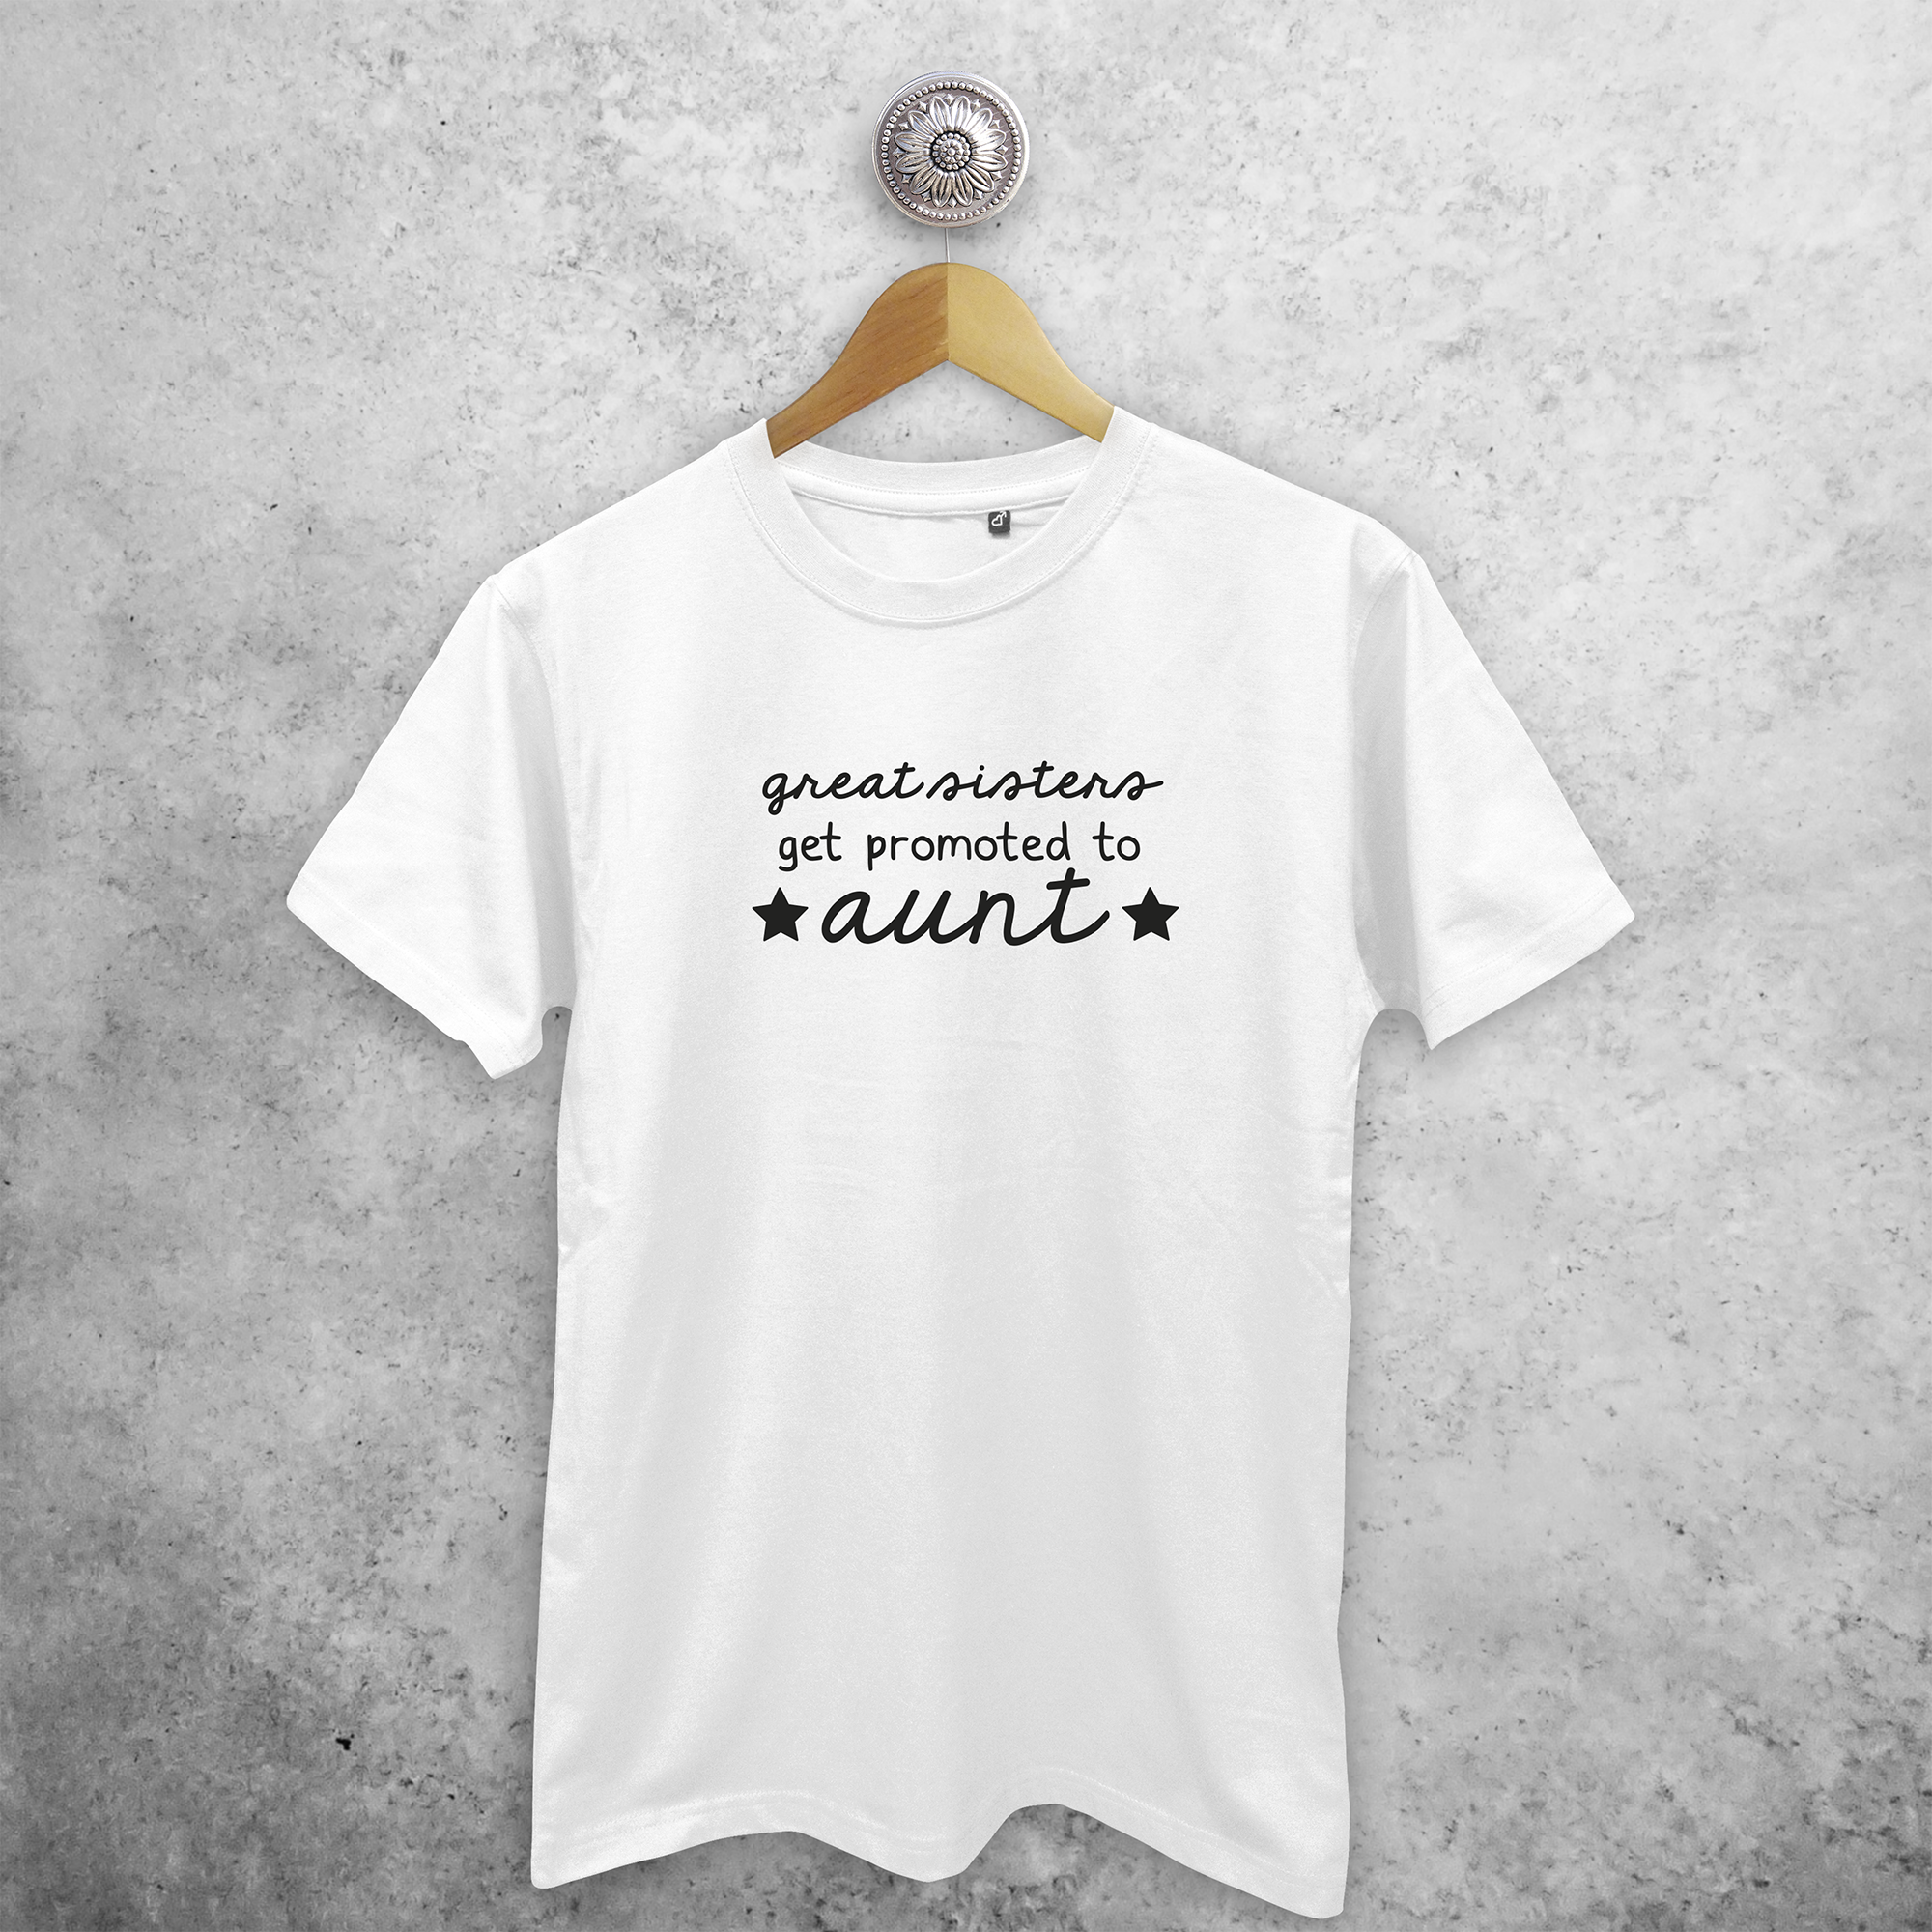 'Great sisters get promoted to aunt' adult shirt